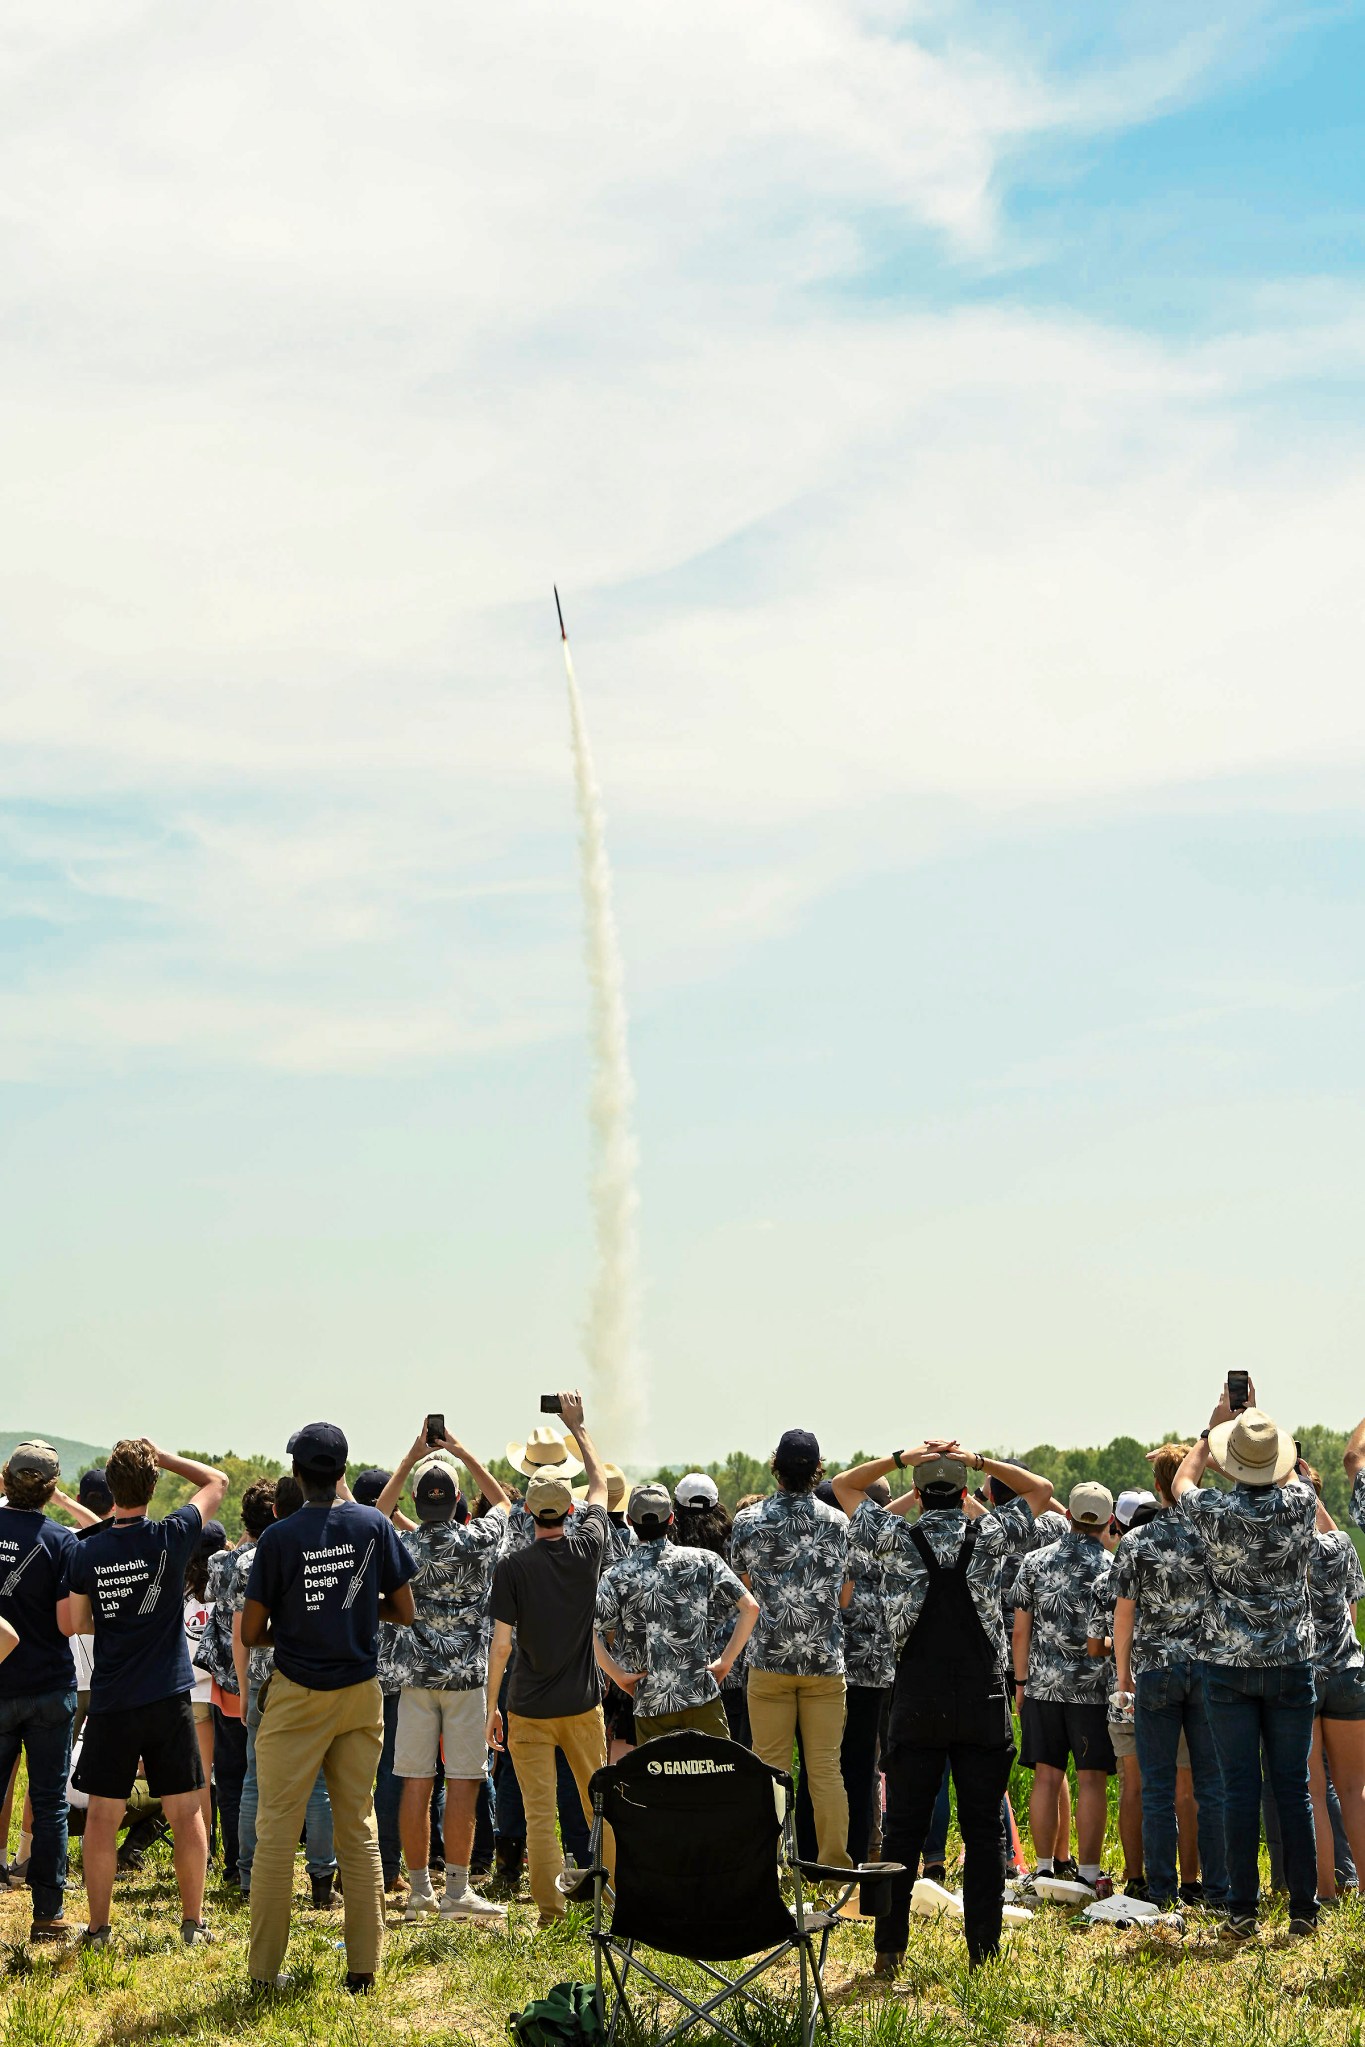 Competitors from NASA's 2022 Student Launch challenge observe a rocket launch at Bragg Farms in Toney, Alabama. 